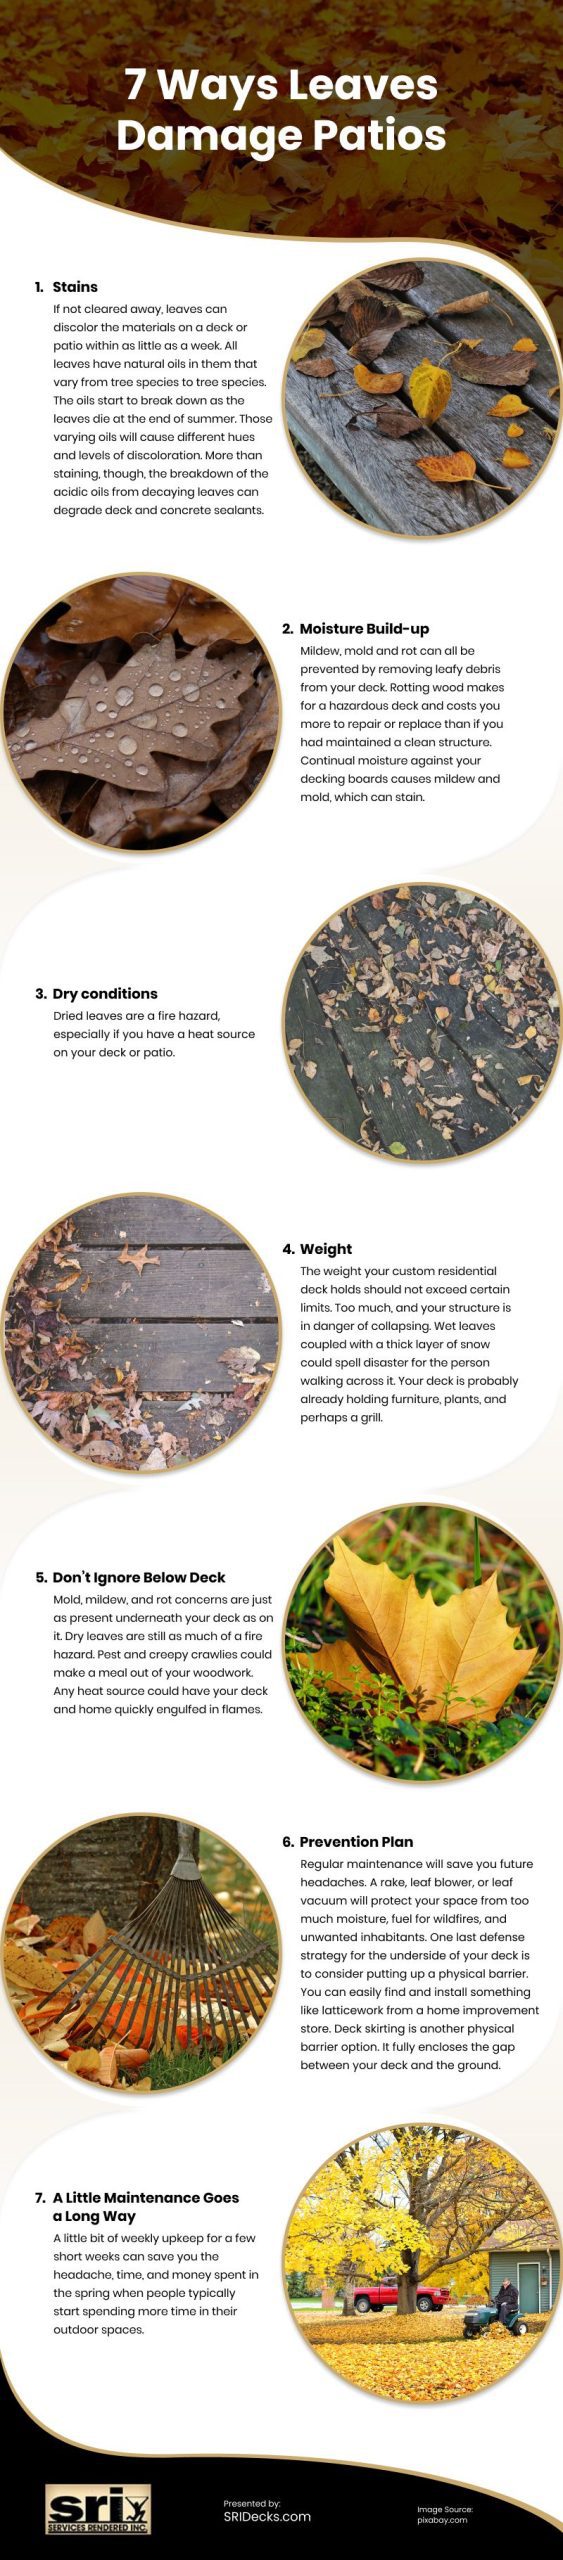 7 Ways Leaves Damage Patios Infographic